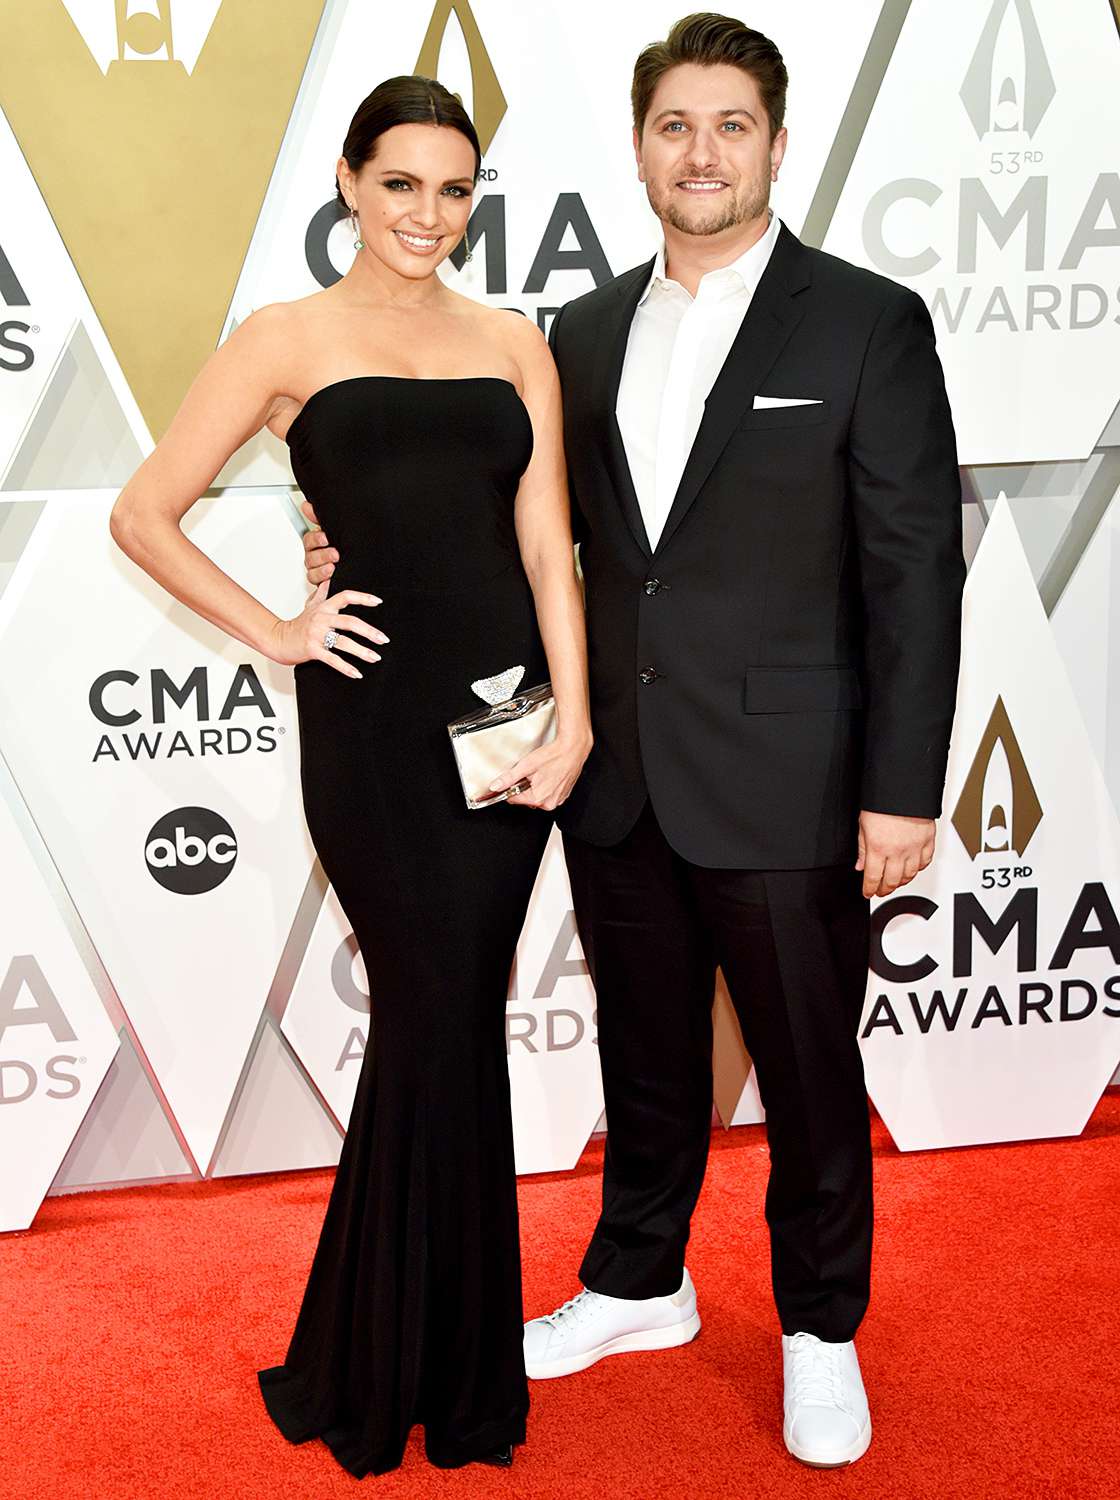 Renee Blair and Jordan Schmidt attend the 53rd annual CMA Awards at the Music City Center on November 13, 2019 in Nashville, Tennessee.